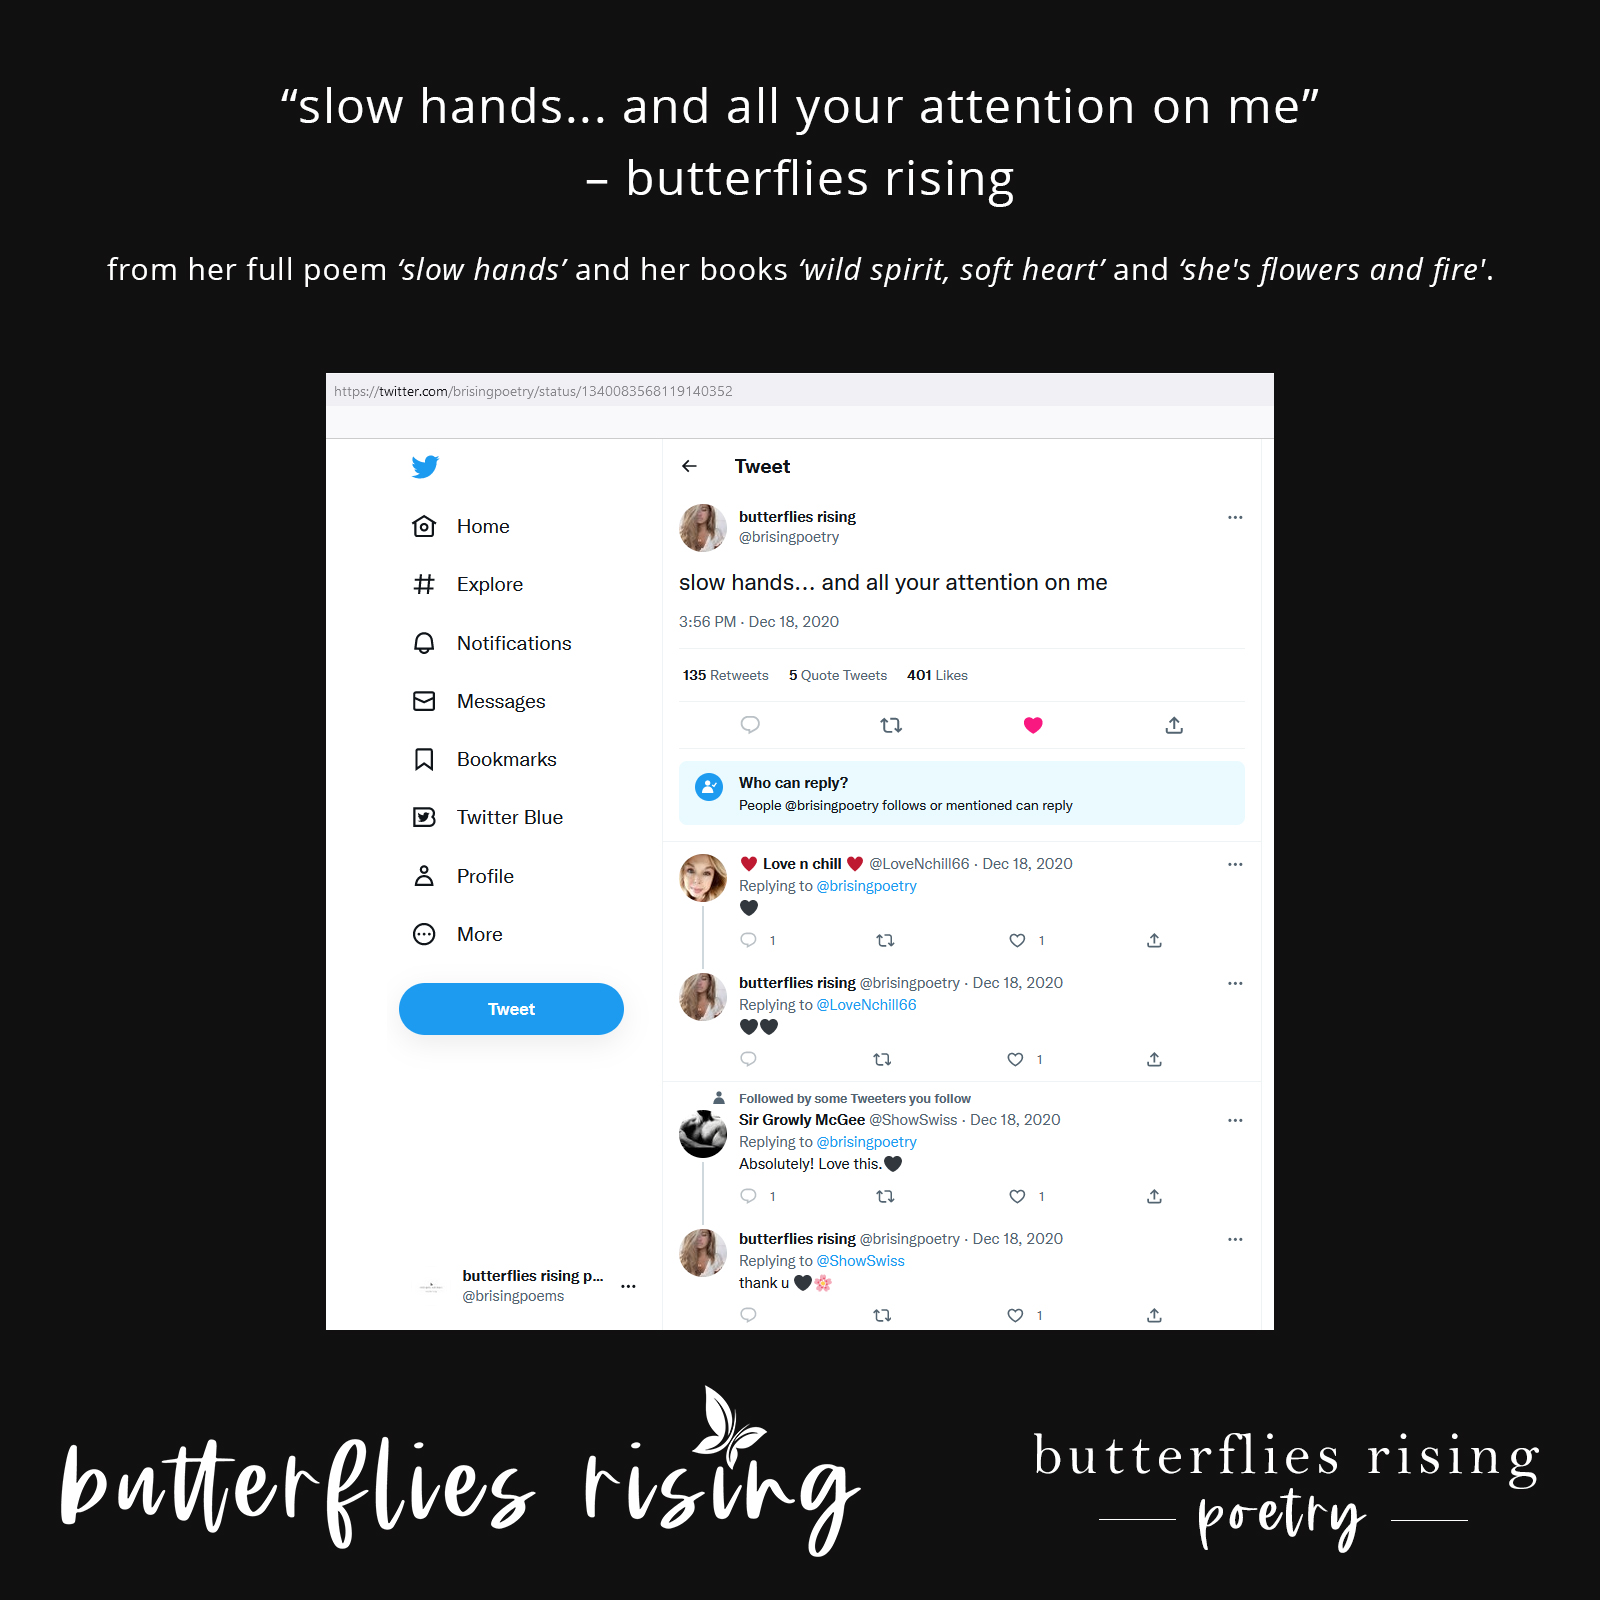 slow hands... and all your attention on me - butterflies rising